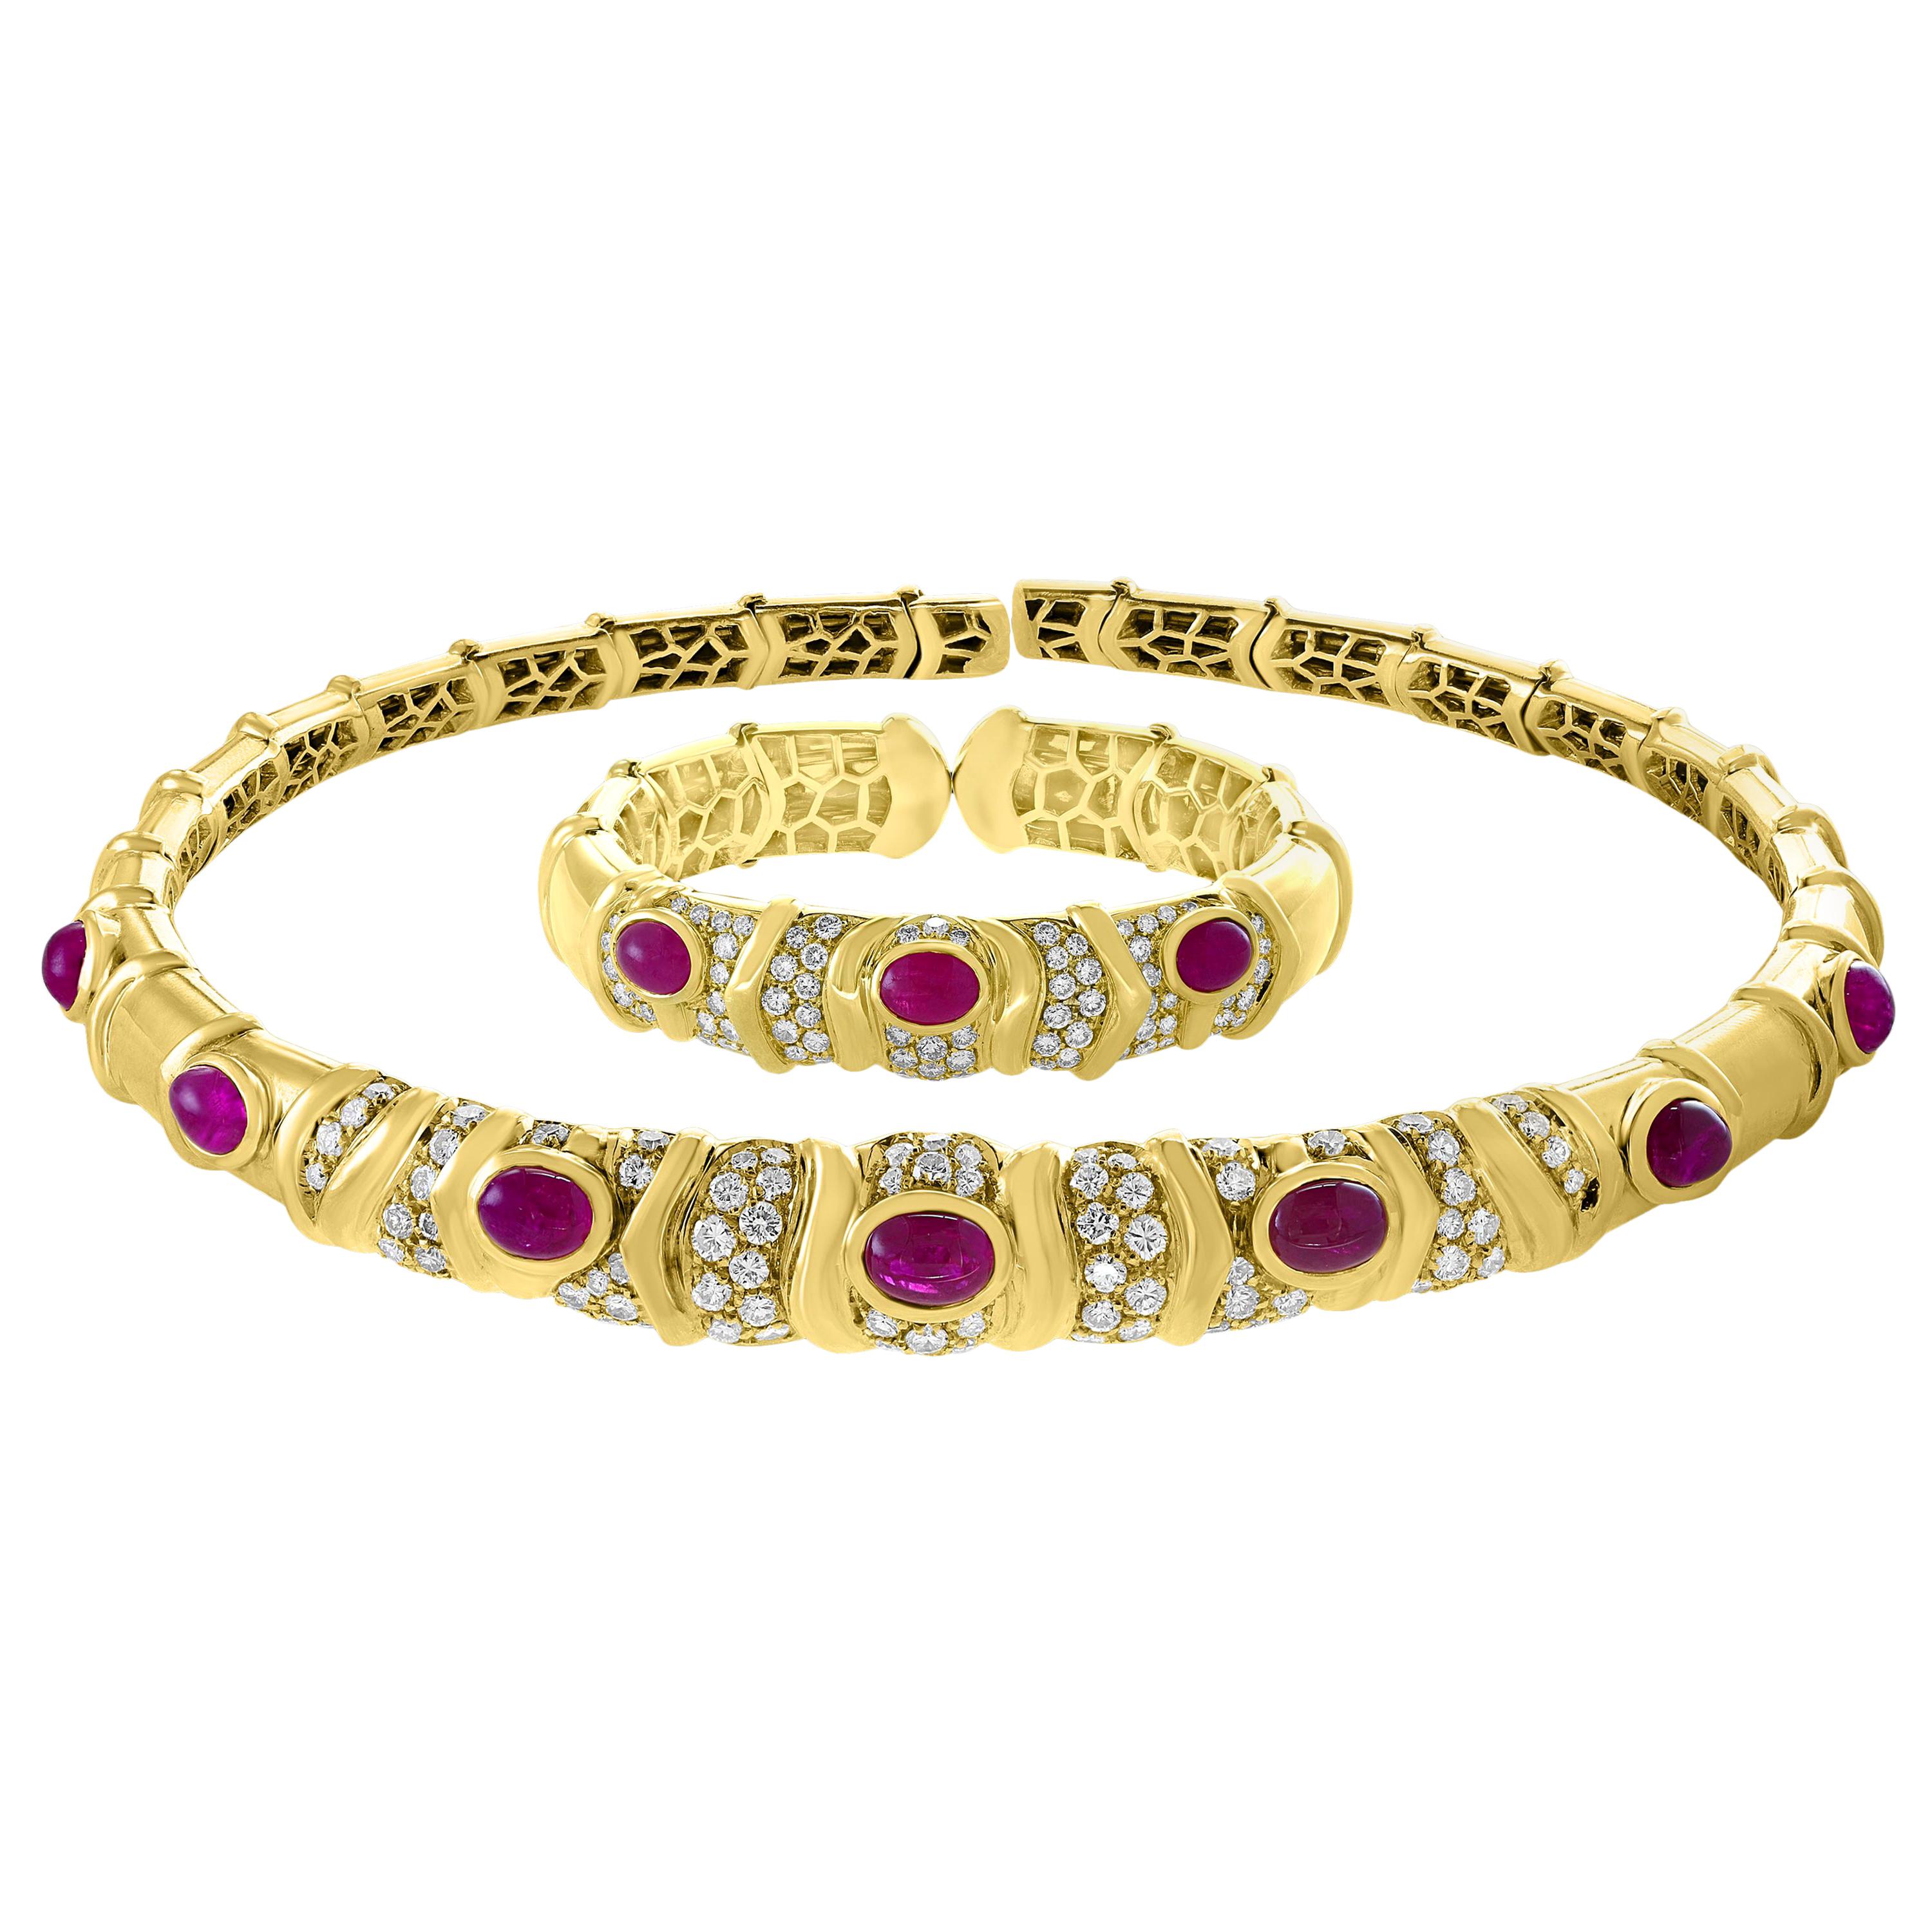 Natural Burma Cabochon Ruby and Diamond Necklace  Set 18 Karat Gold
This Necklace is made out of 18 Karat Yellow gold . Necklace consisting of 7 Oval shape natural Burma ruby having a total weight of approximately 12 carats set with approximately